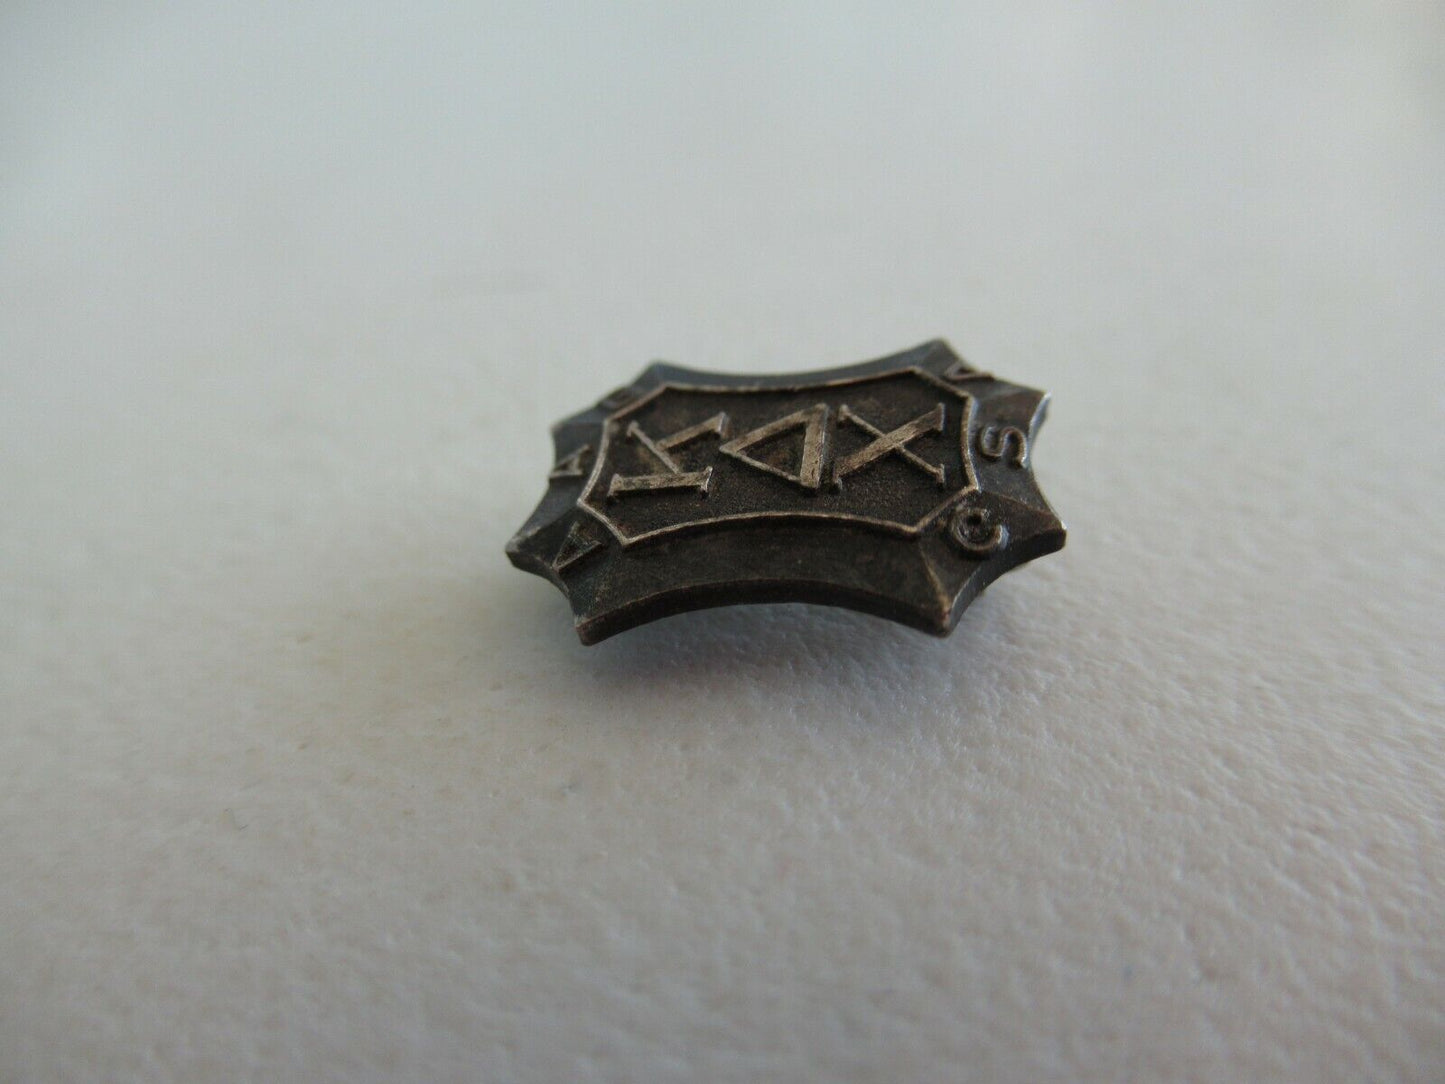 USA FRATERNITY PIN KAPPA DELTA CHI. MADE IN SILVER. 813